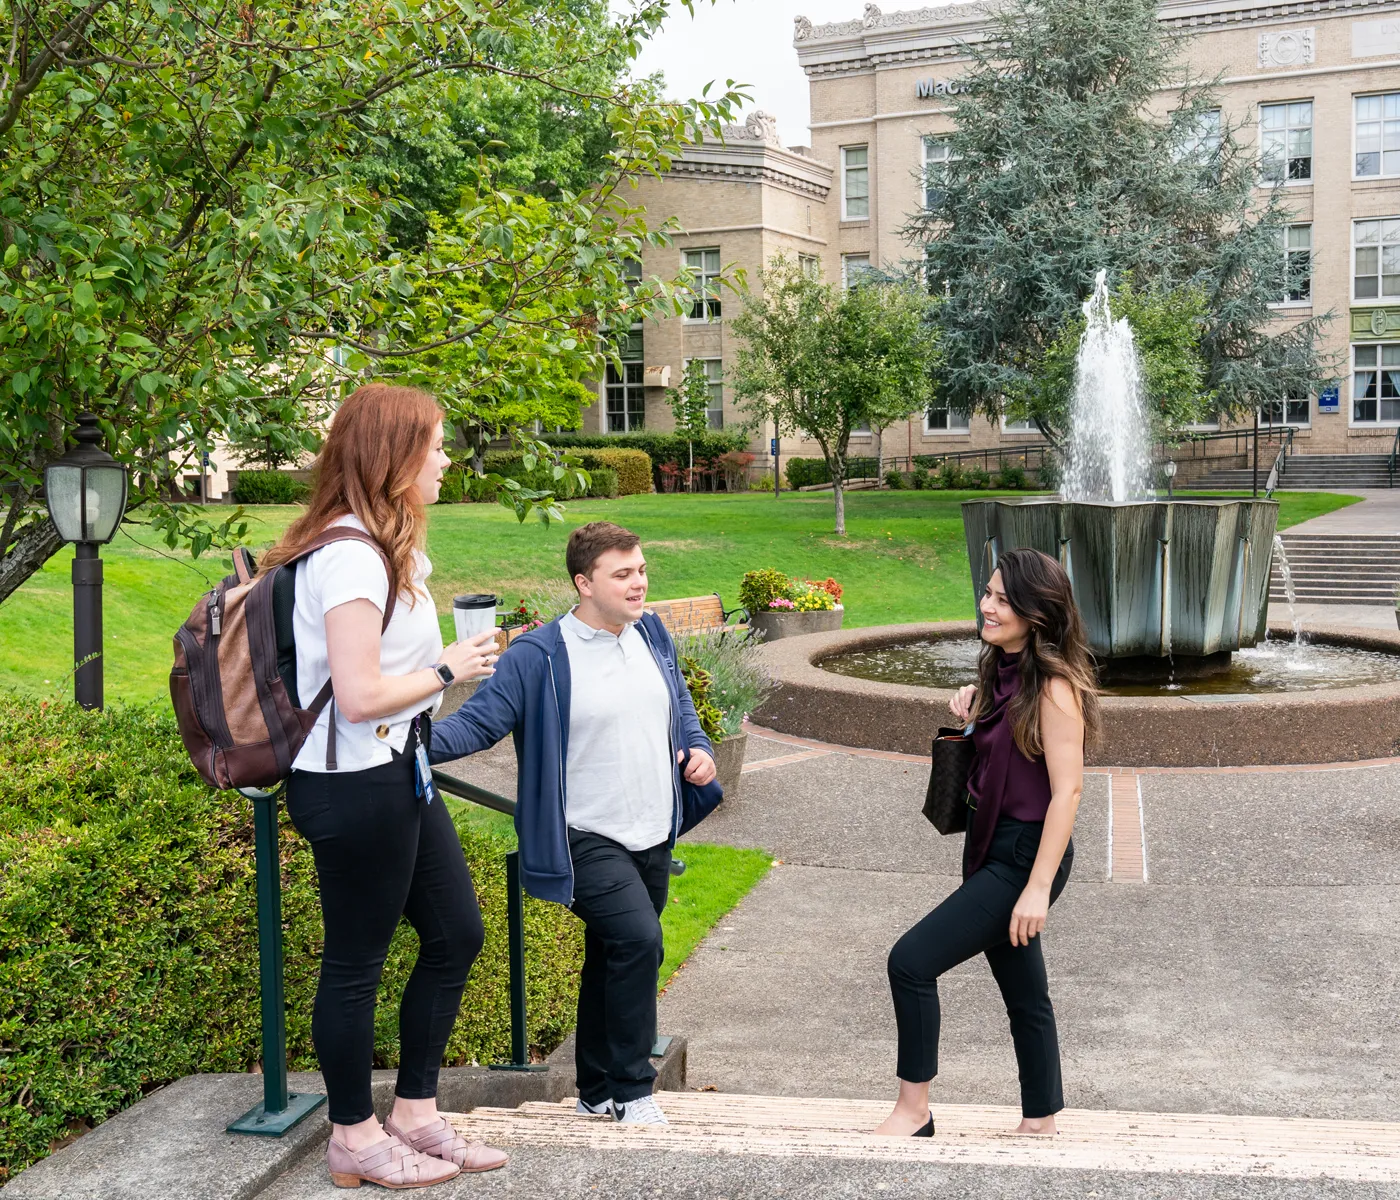 Three students stand on stairway talking outdoors with fountain and buildings behind them